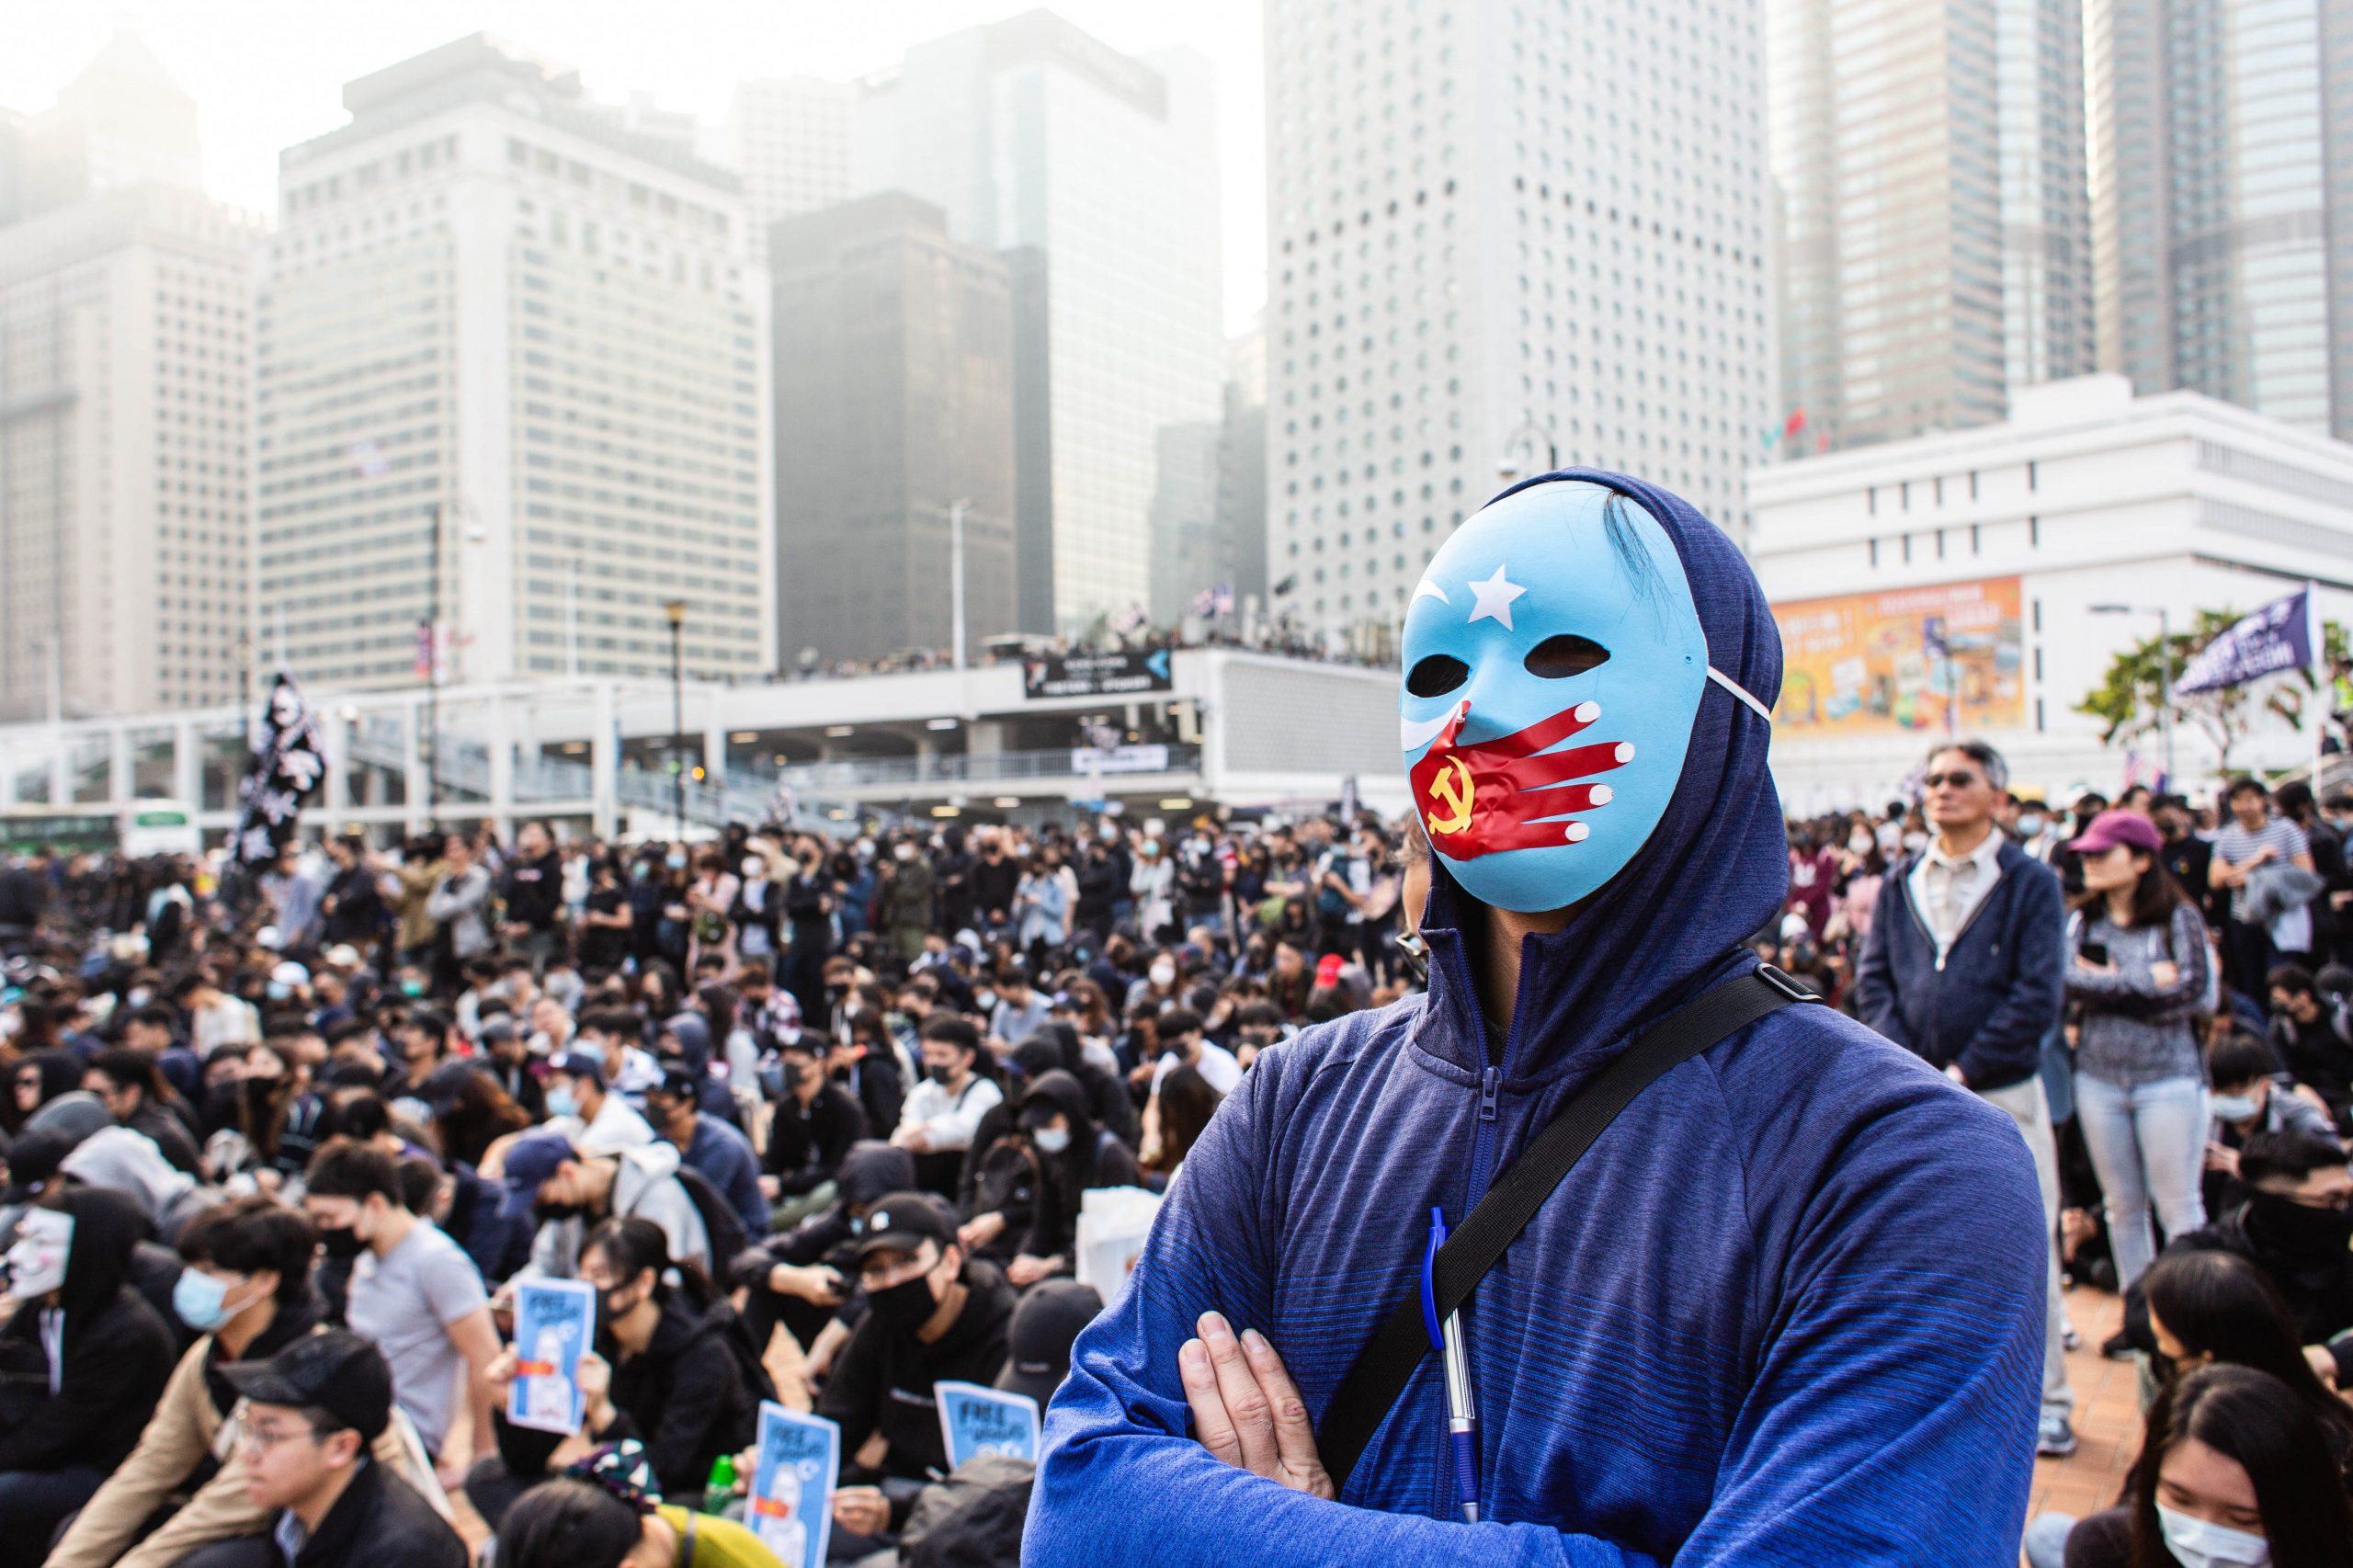 A masked protester looks on during the demonstration. 6th month of civil unrest, protesters attend a rally in solidarity with Uyghurs in Xinjiang. Speeches were given by event organisers. Riot Policemen appeared and were confronted by masked demonstrators.